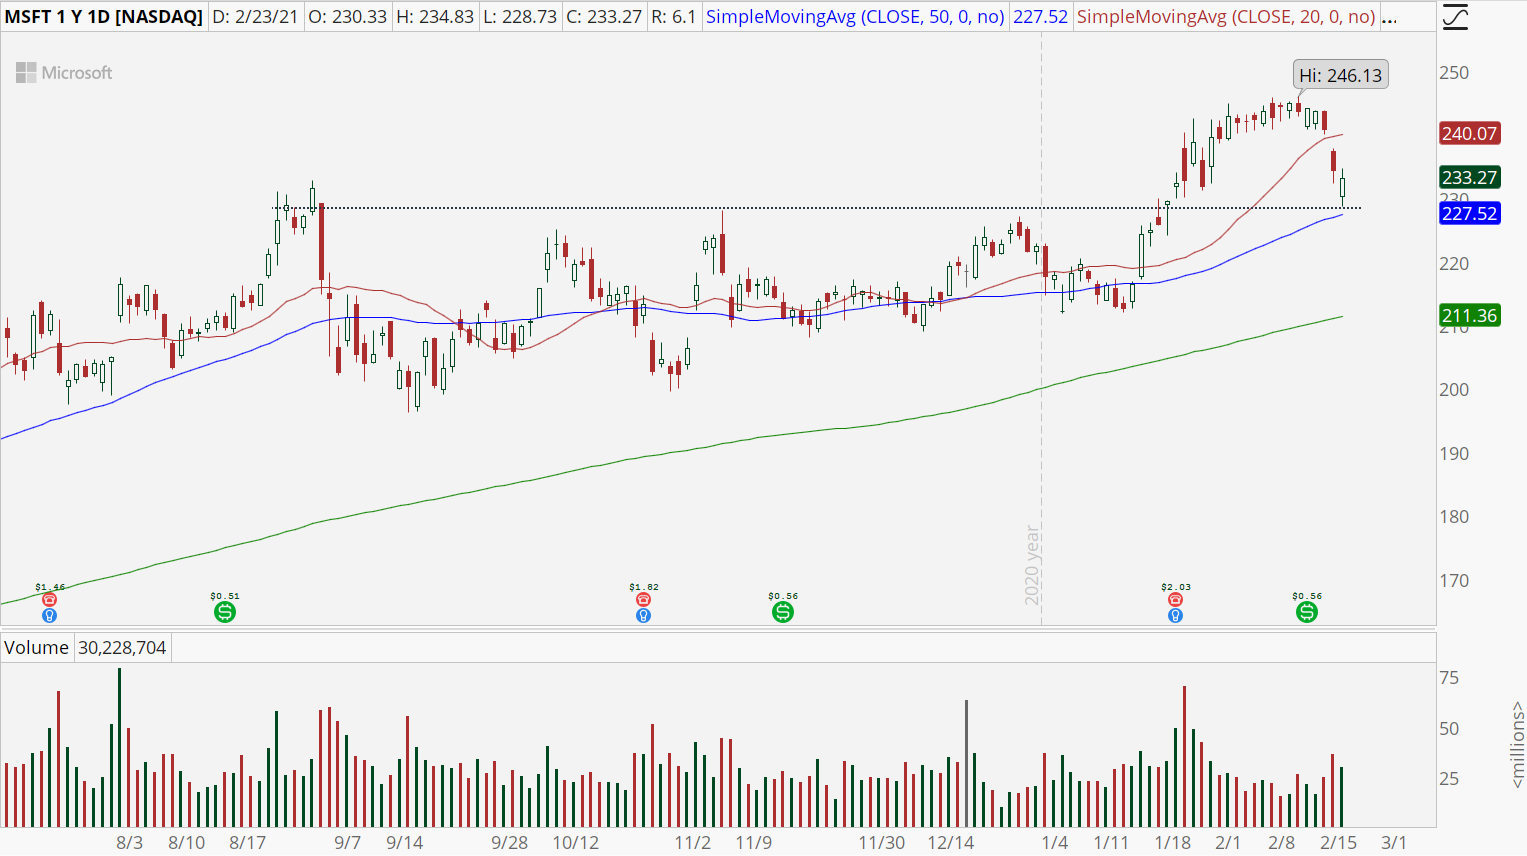 Microsoft (MSFT) stock with bull retracement pattern